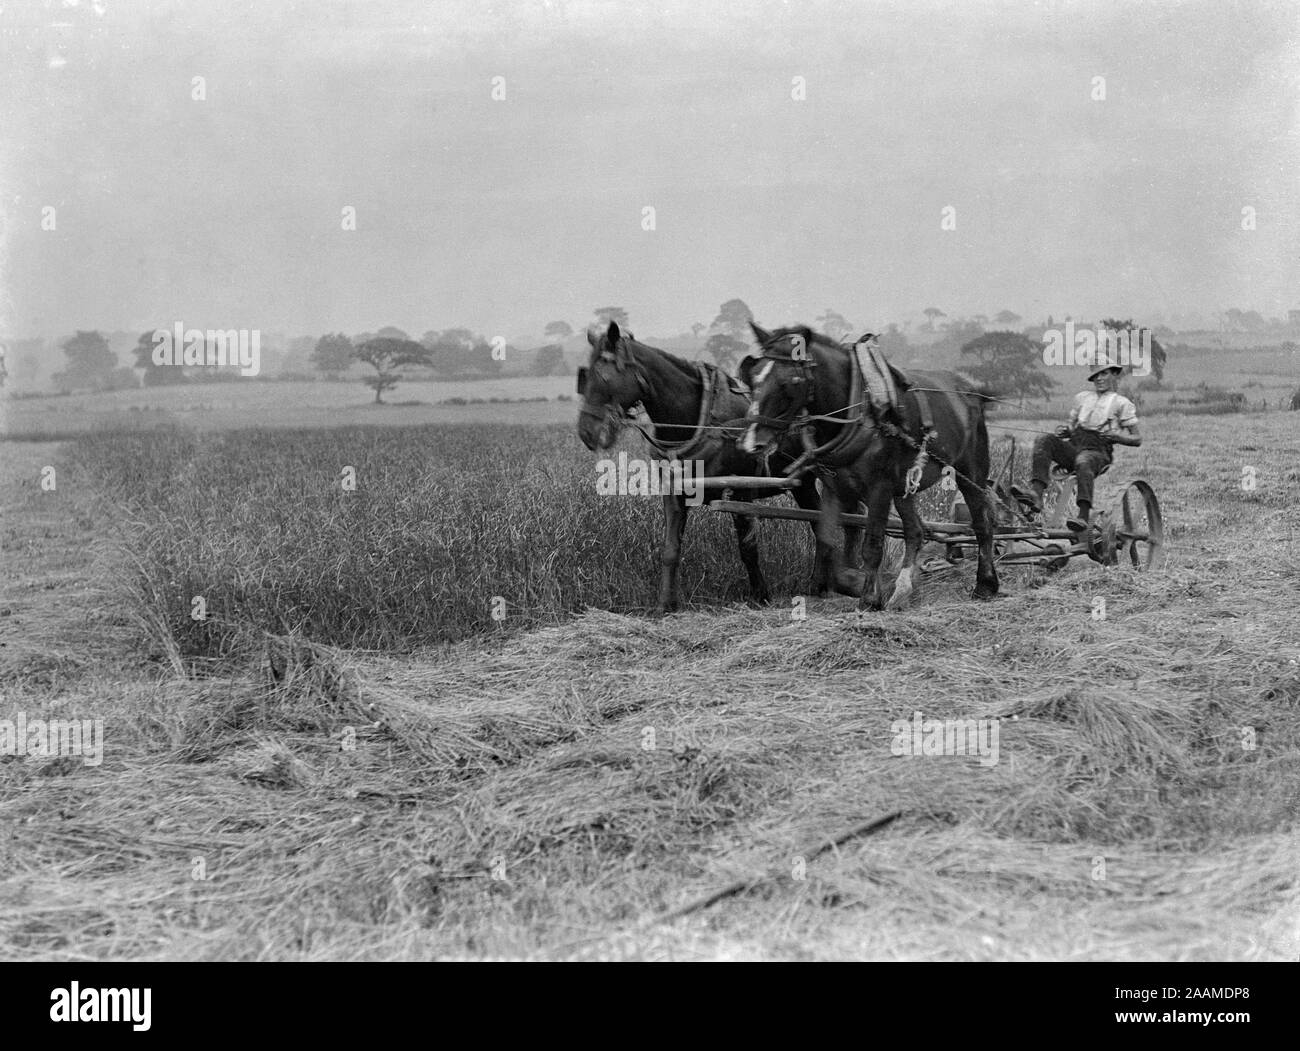 A late Victorian or early Edwardian English vintage black and white photograph showing two large horses pulling a piece of farm machinery designed to cut hay, with the farmer sitting on the machine leading the horses. Stock Photo